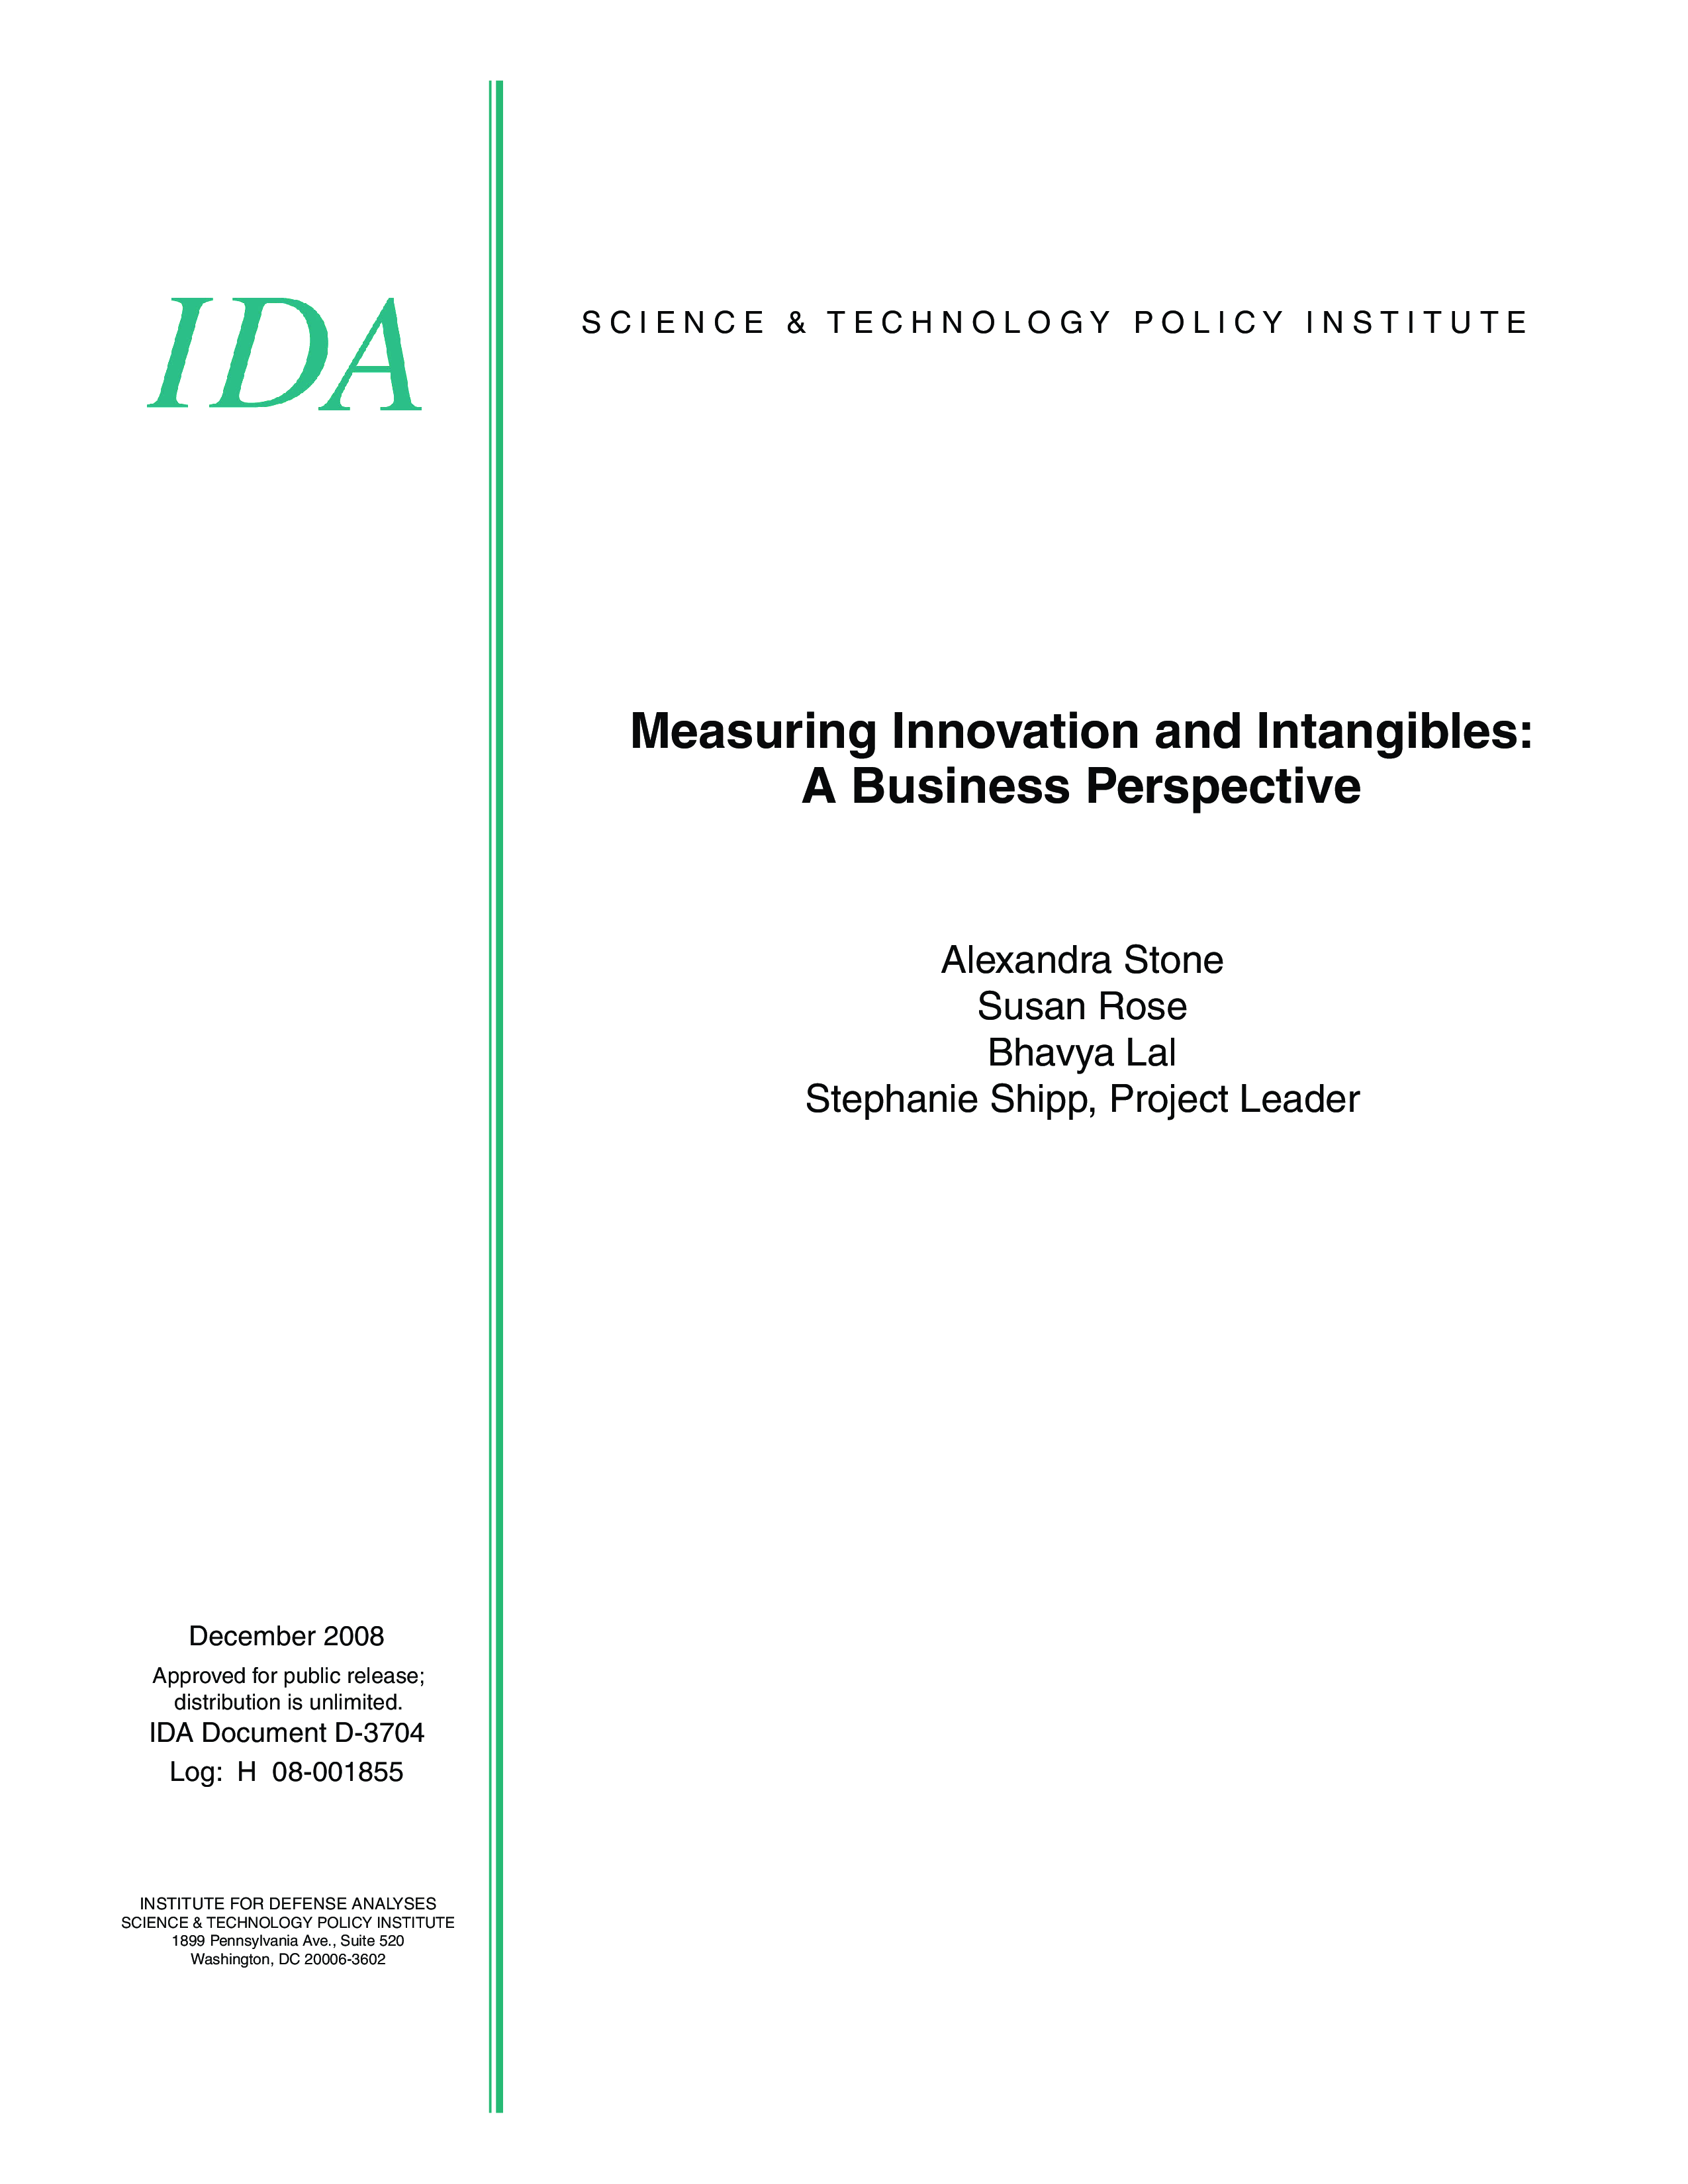 Measuring Innovation and Intangibles: A Business Perspective